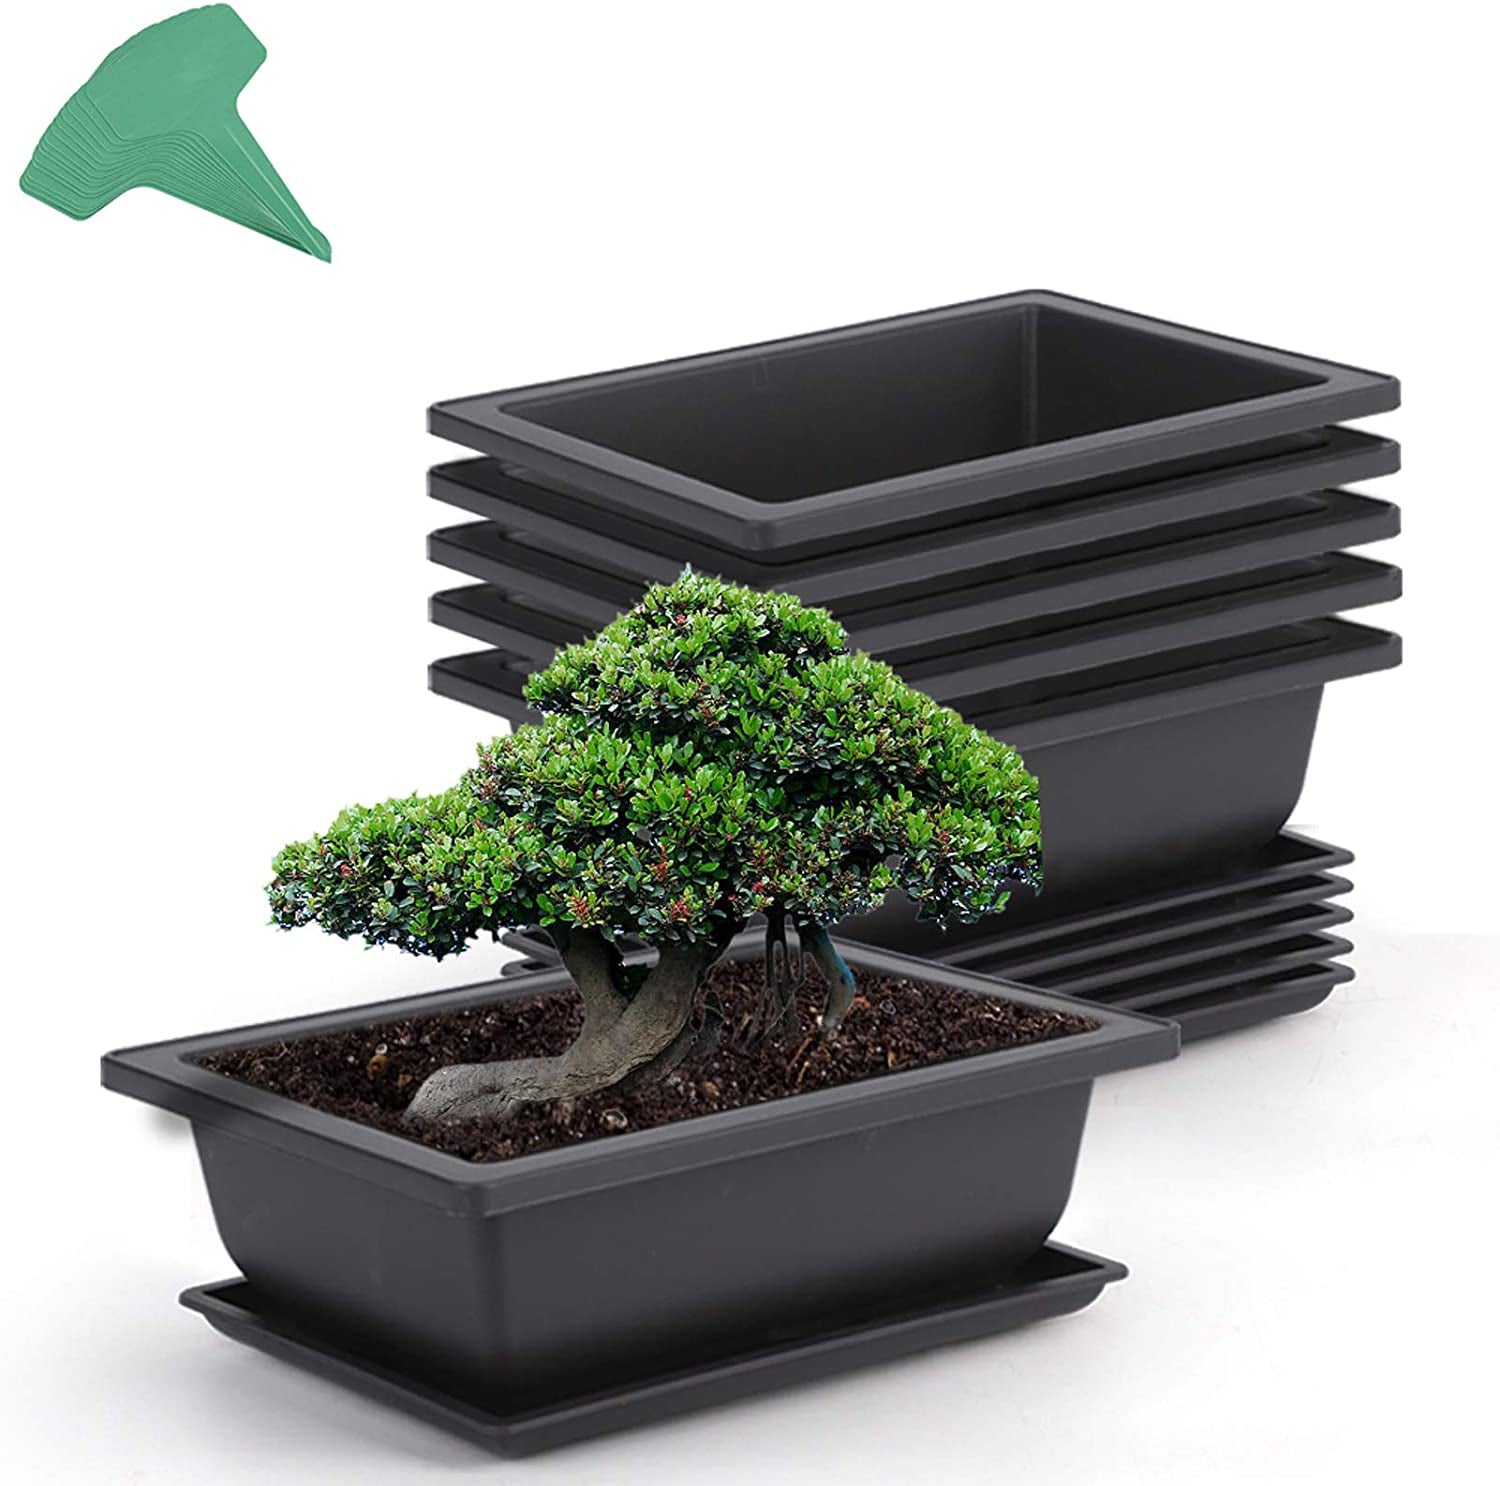 GROWNEER, GROWNEER 6 Packs 6.5 Inches Bonsai Training Pots with 15 Pcs Plant Labels, Plastic Bonsai Plants Growing Pot for Garden, Yard, Office, Living Room, Balcony and More